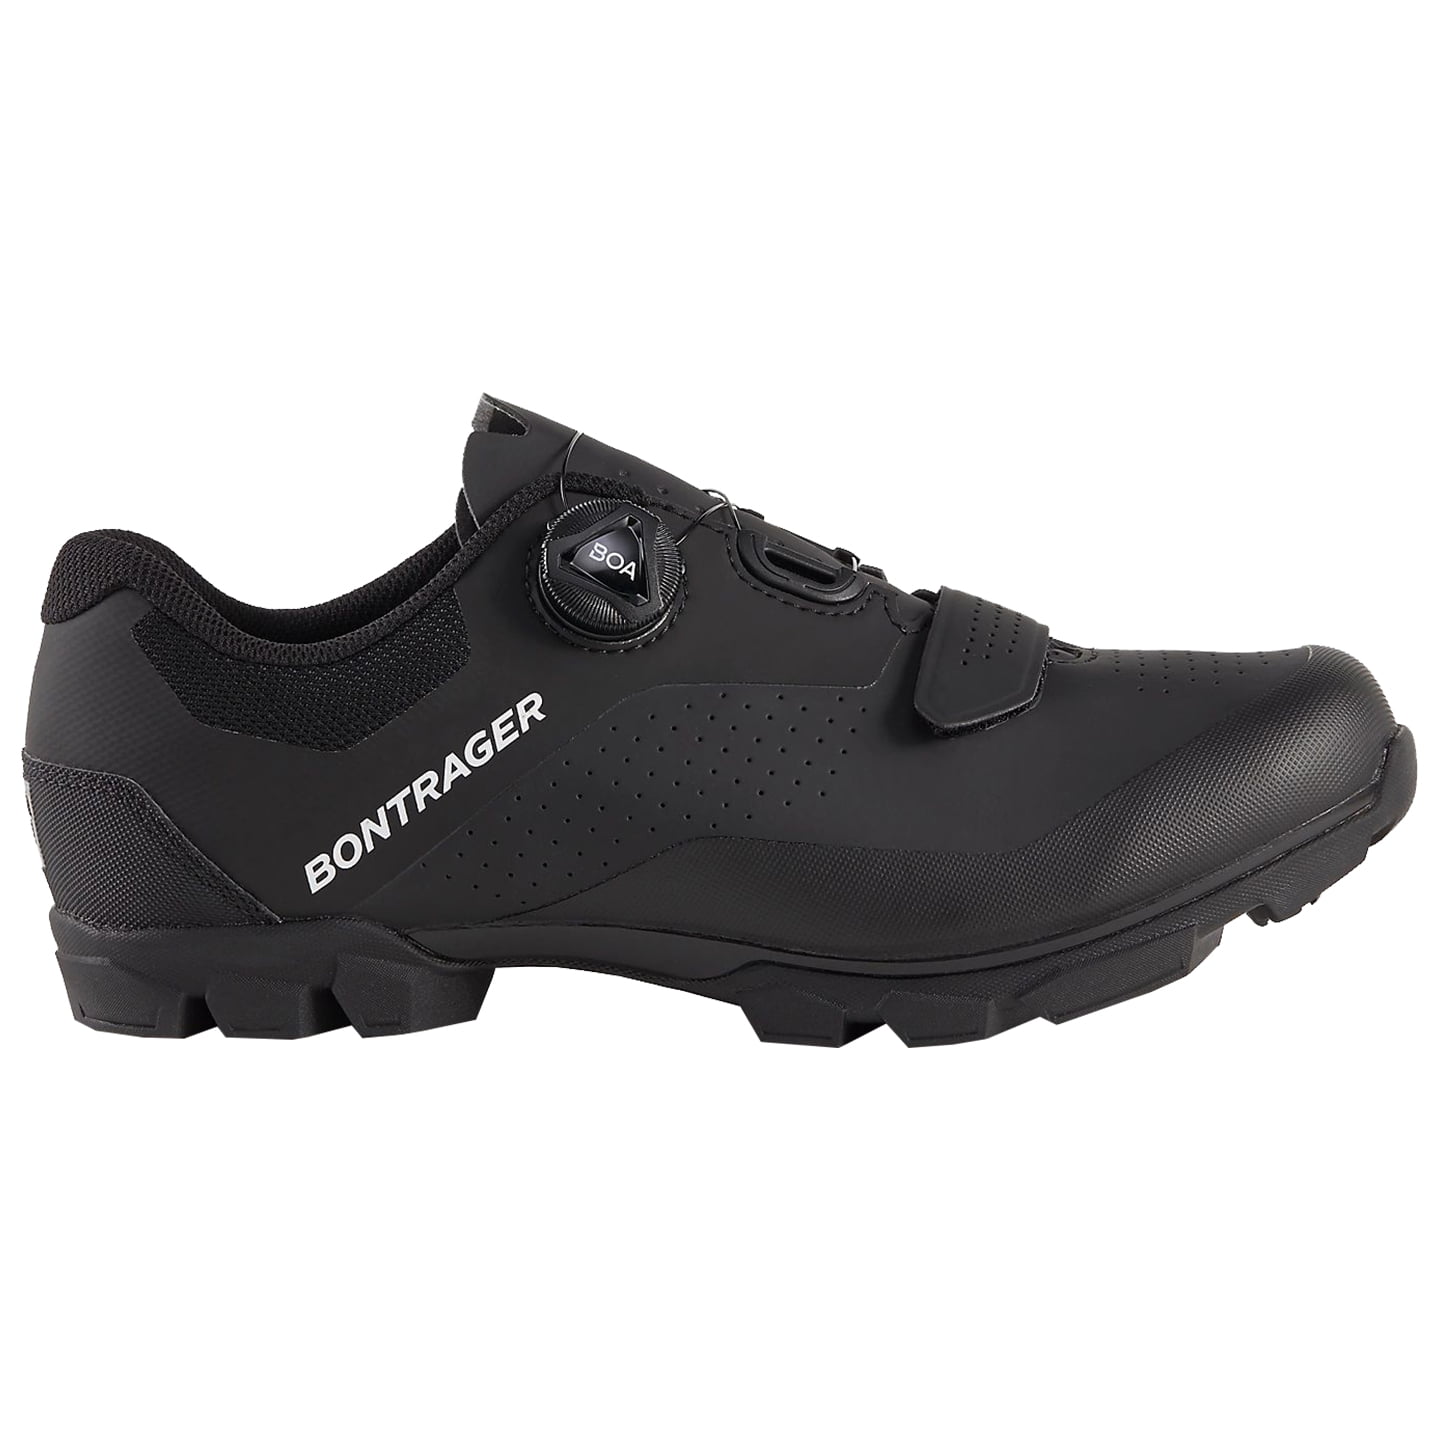 BONTRAGER Foray MTB Shoes MTB Shoes, for men, size 46, Cycling shoes